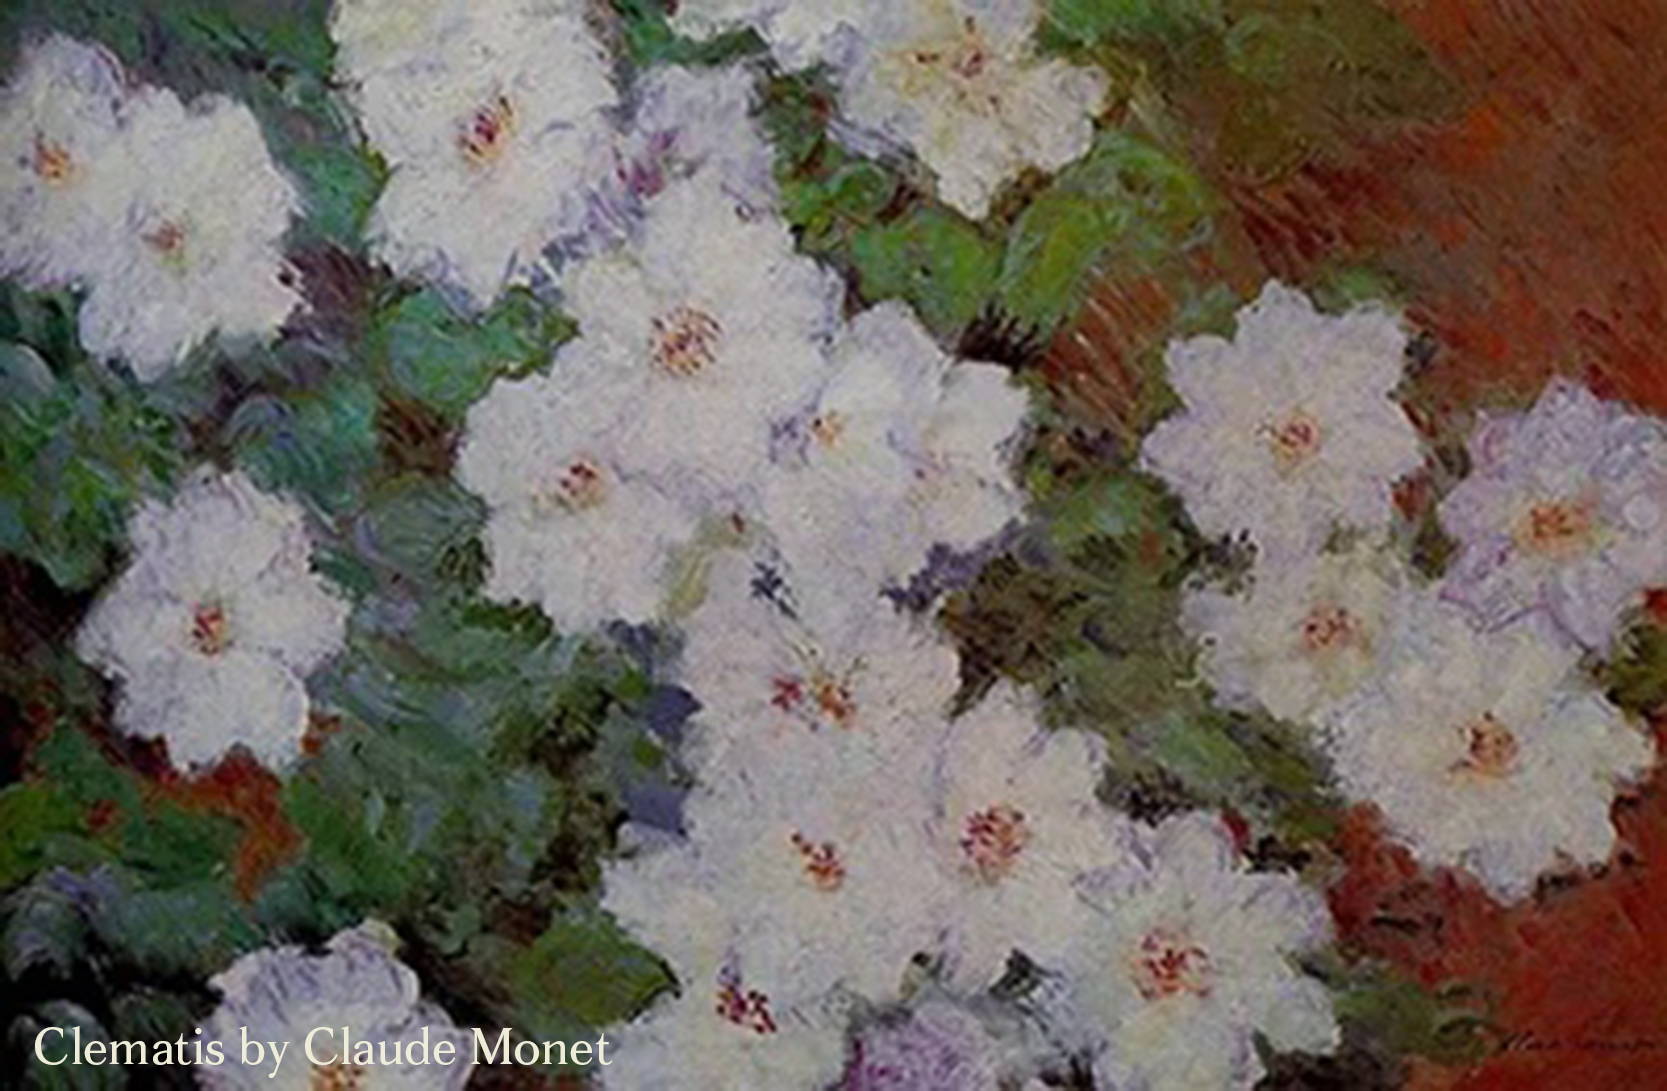 Wild at Heart - Clematis painting by Claude Monet